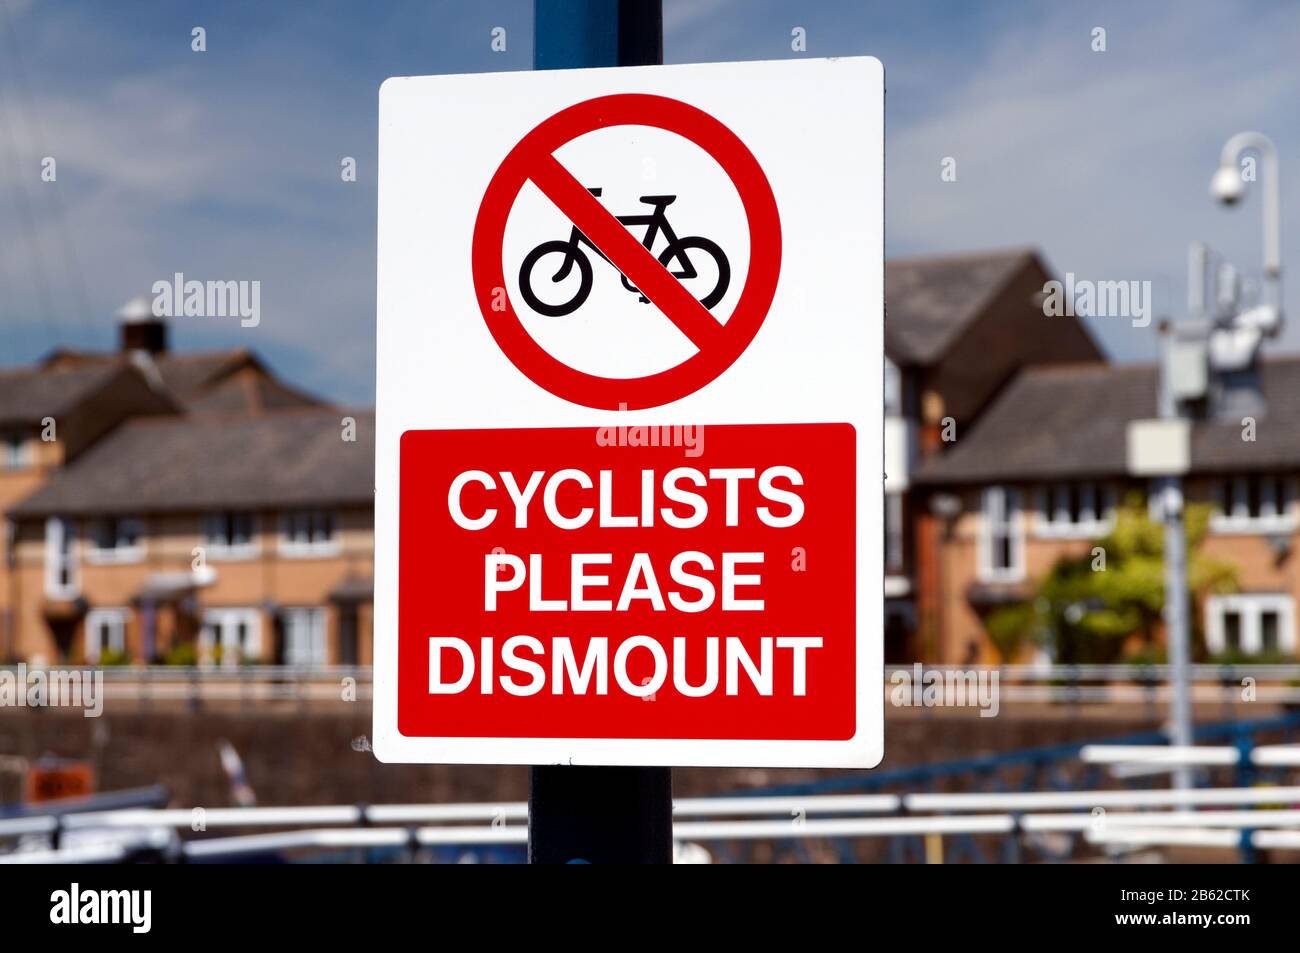 Cyclists please dismount sign, Penarth marina, Vale of Glamorgan, South Wales, UK. Stock Photo